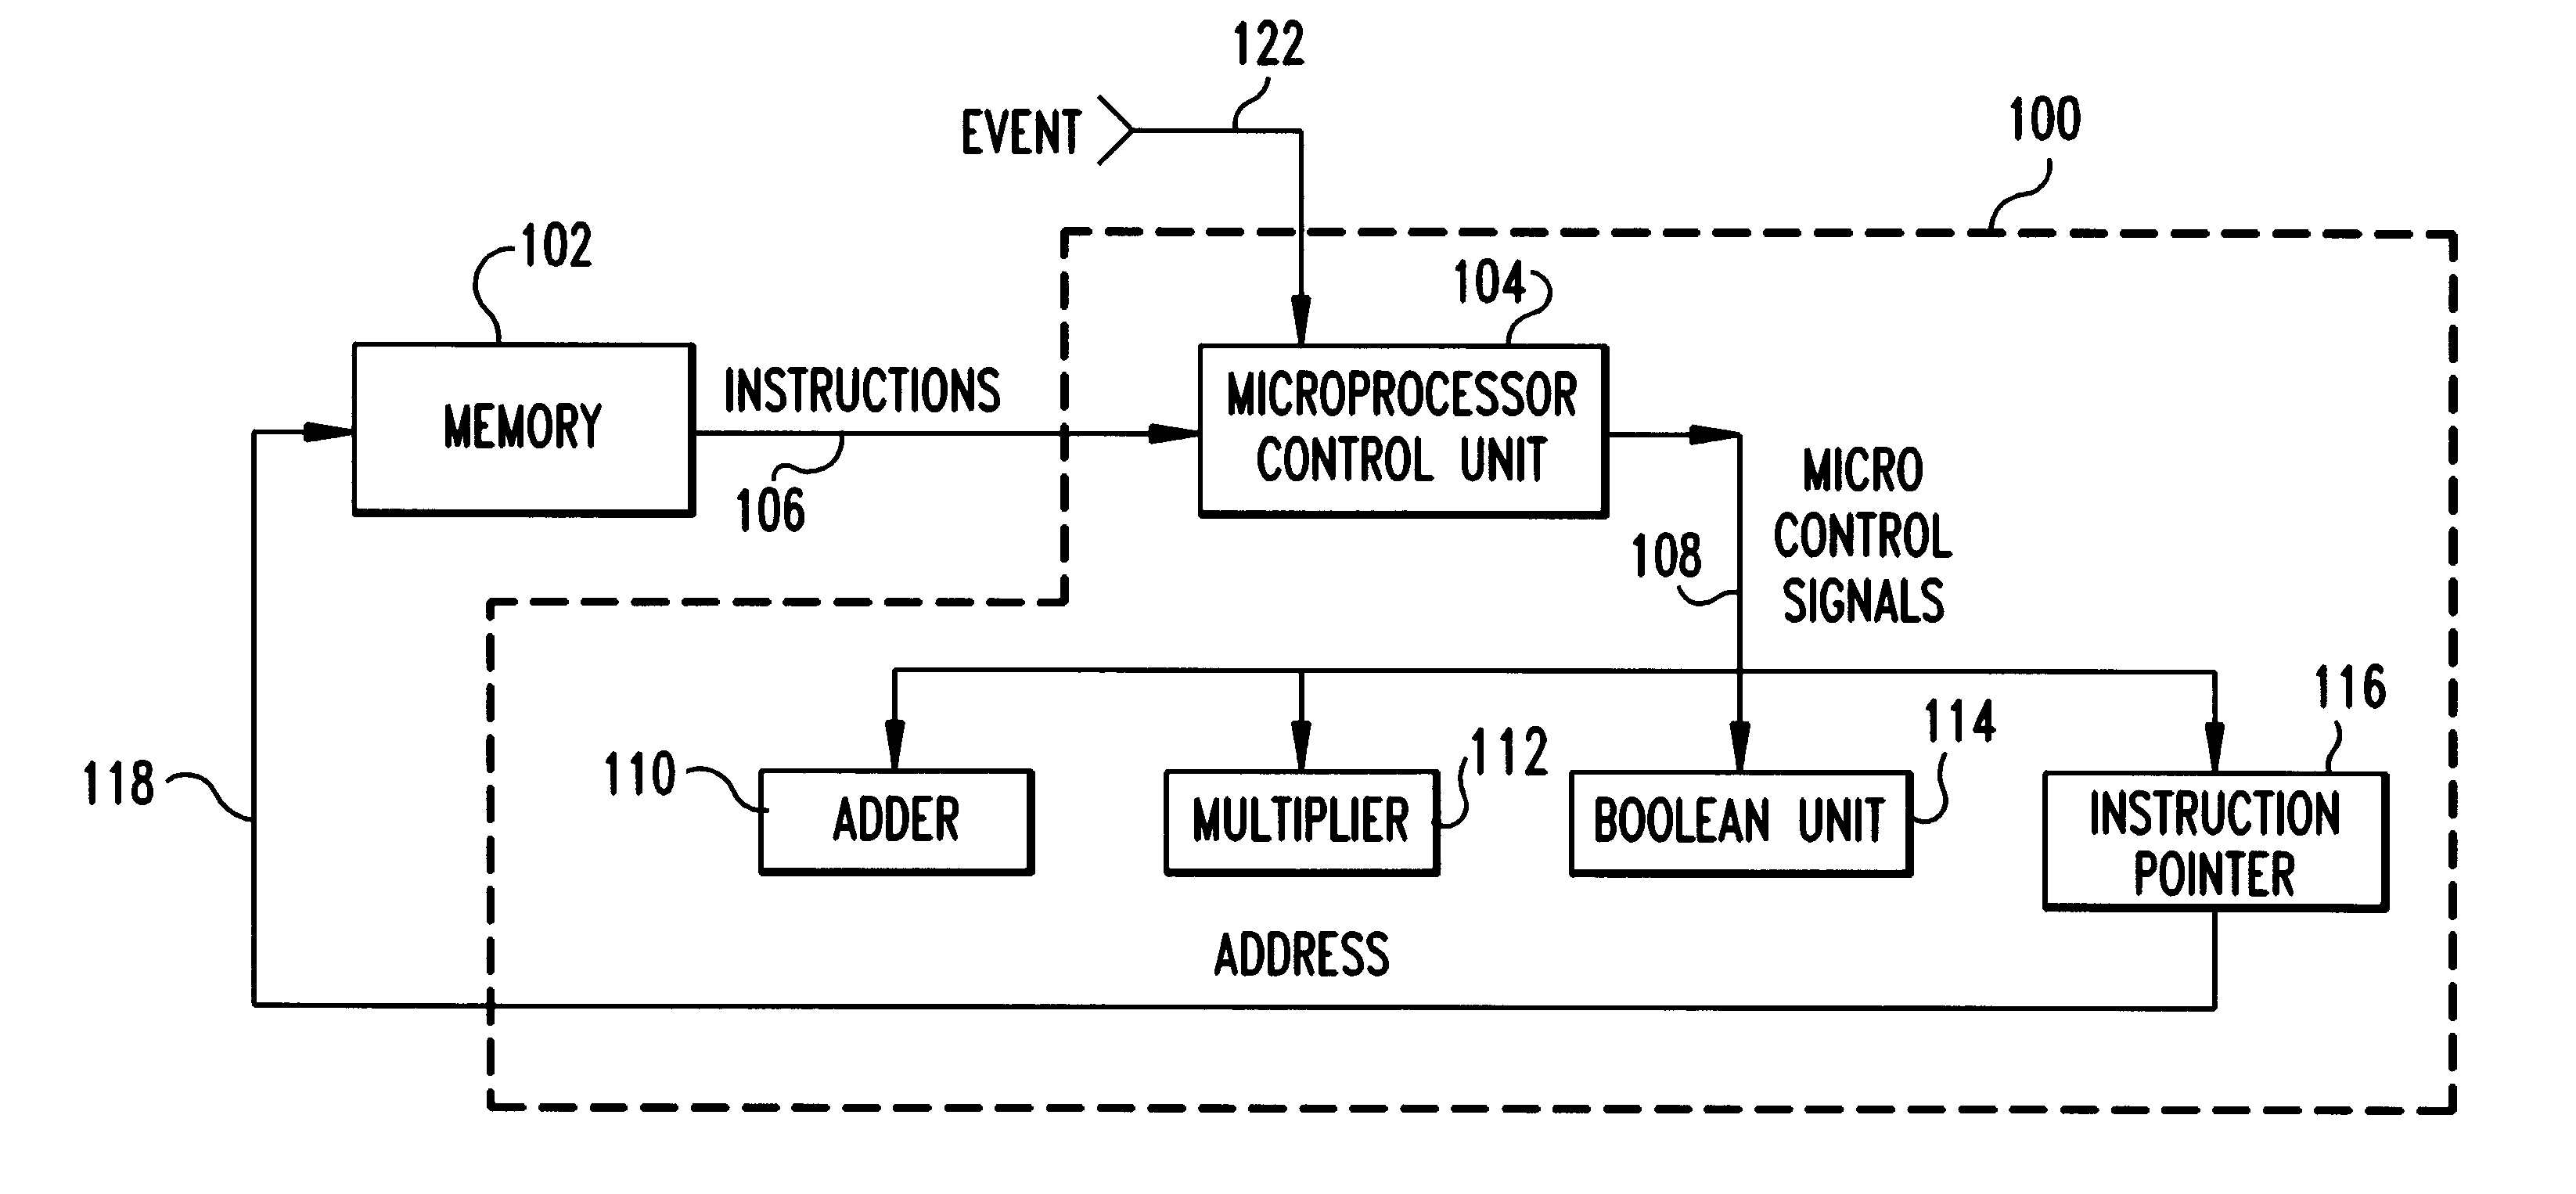 System and method for synchronizing instruction execution with external events